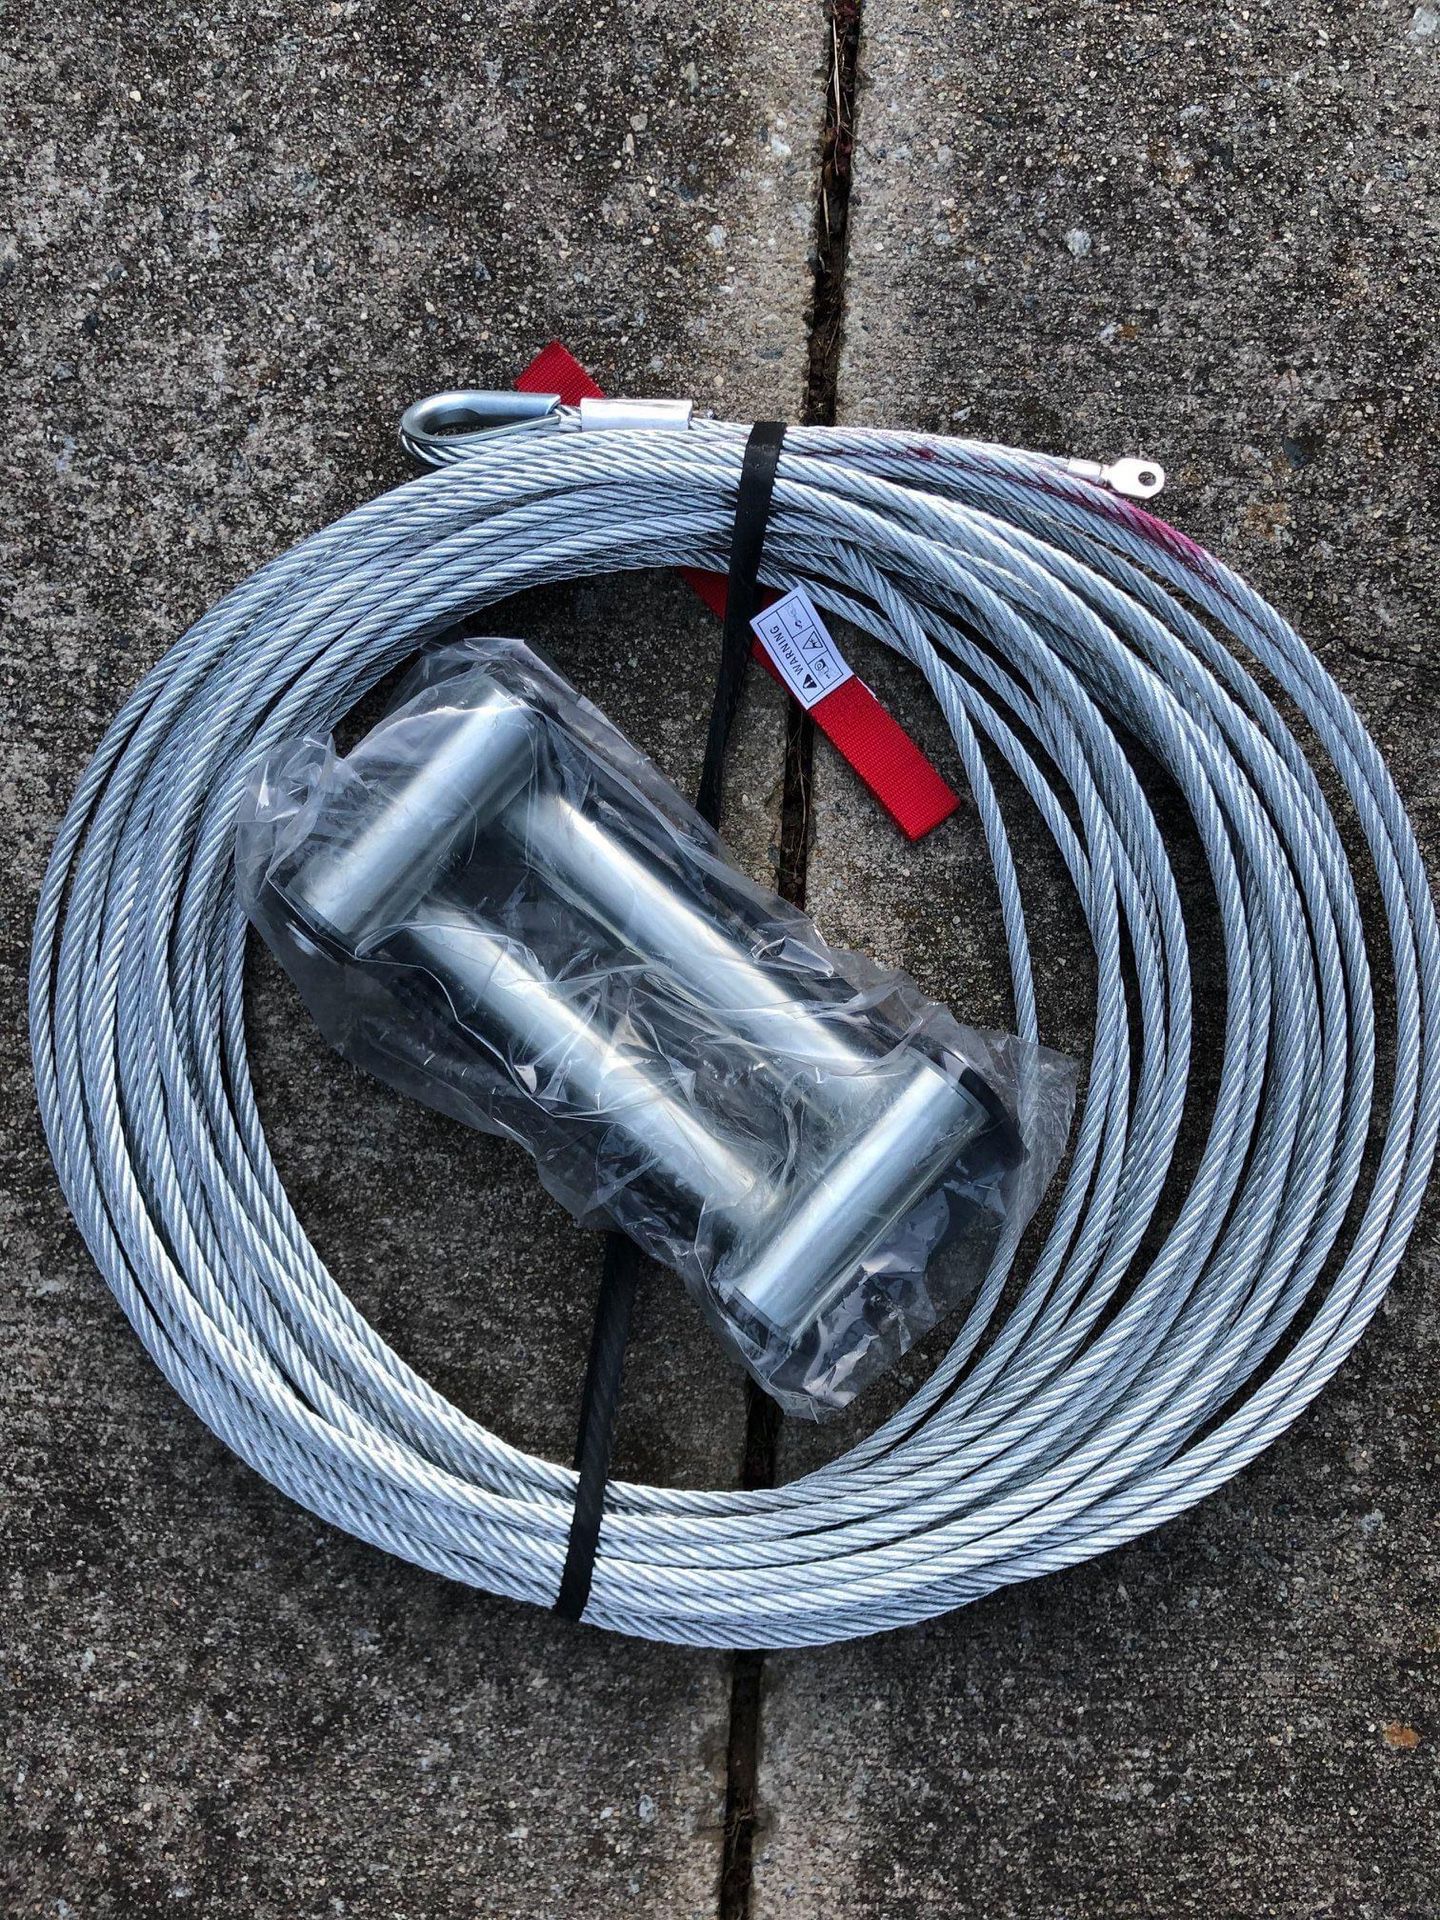 Smittybilt winch steel cable and roller brand new